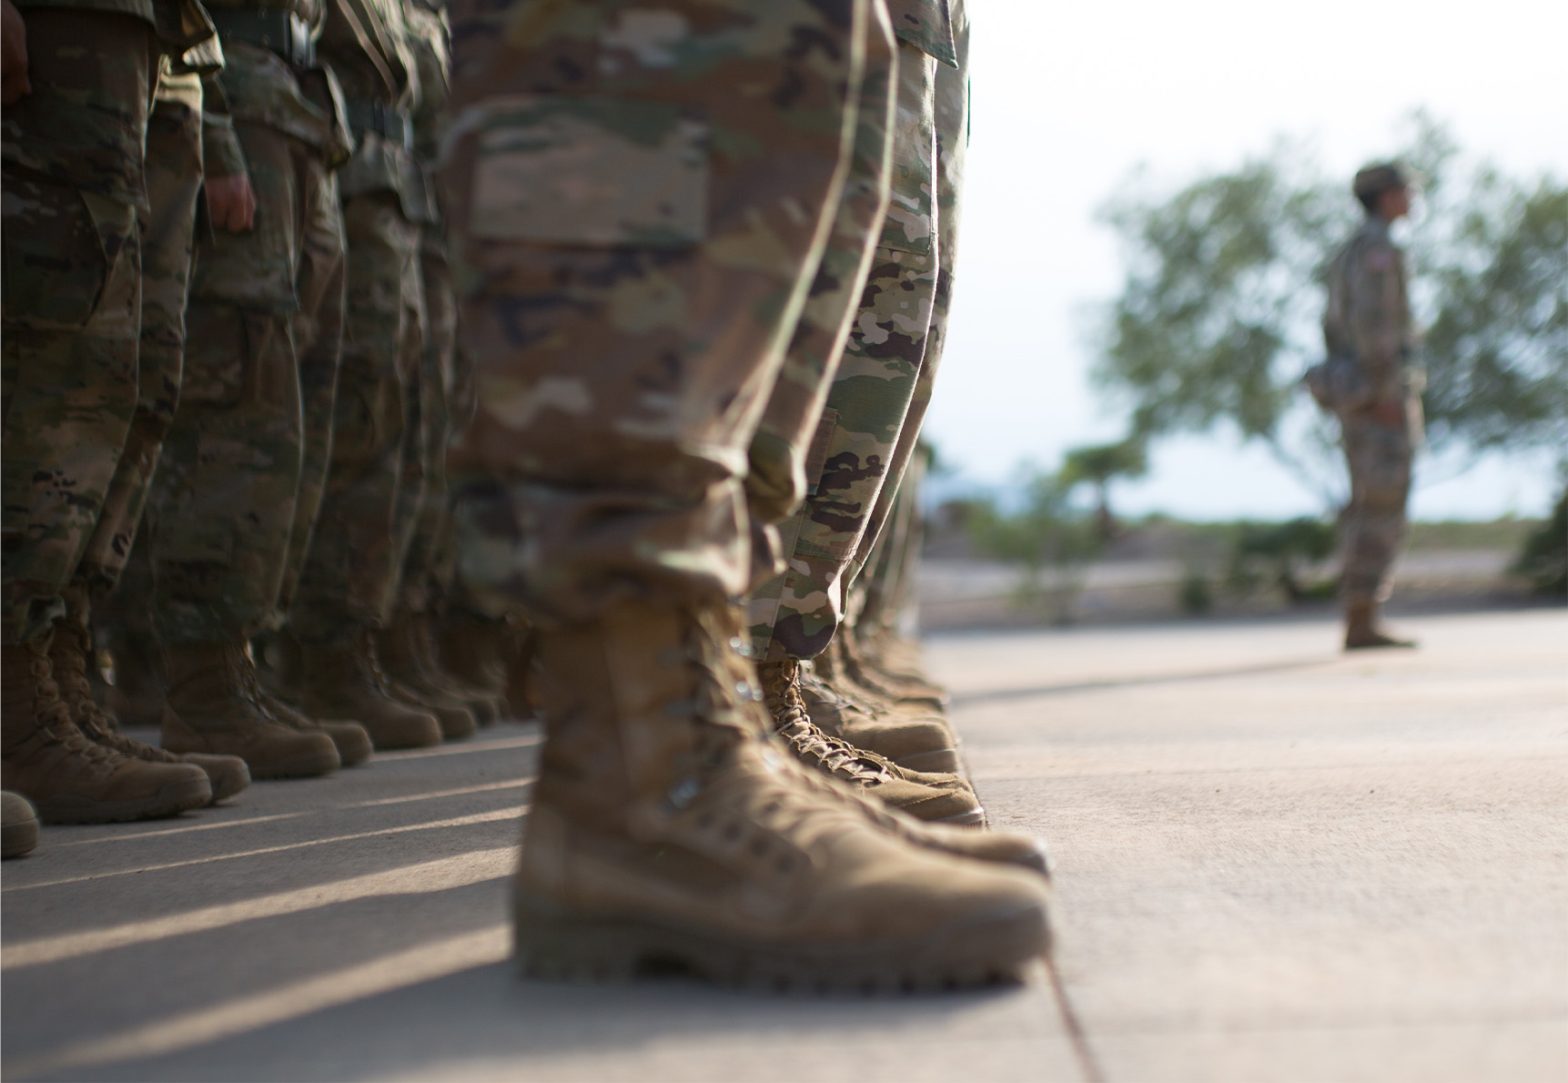 A close-up of a group of soldiers in a line focused on their boots